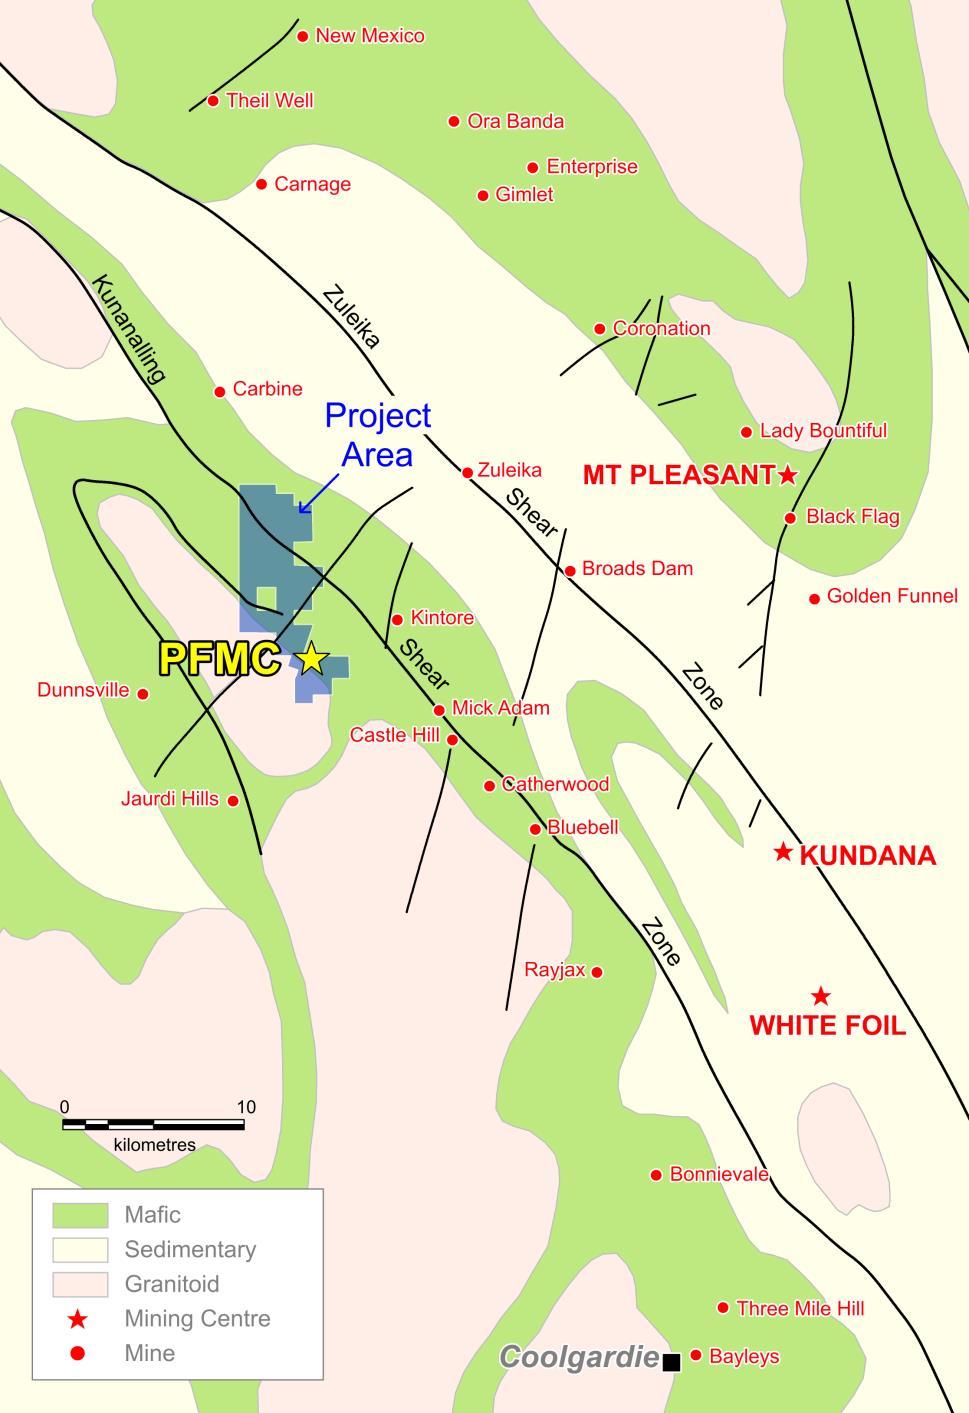 Phillips Find Project Area The Phillips Project hosts a number of previously drilled prospects and priority targets to the north of the PFMC.